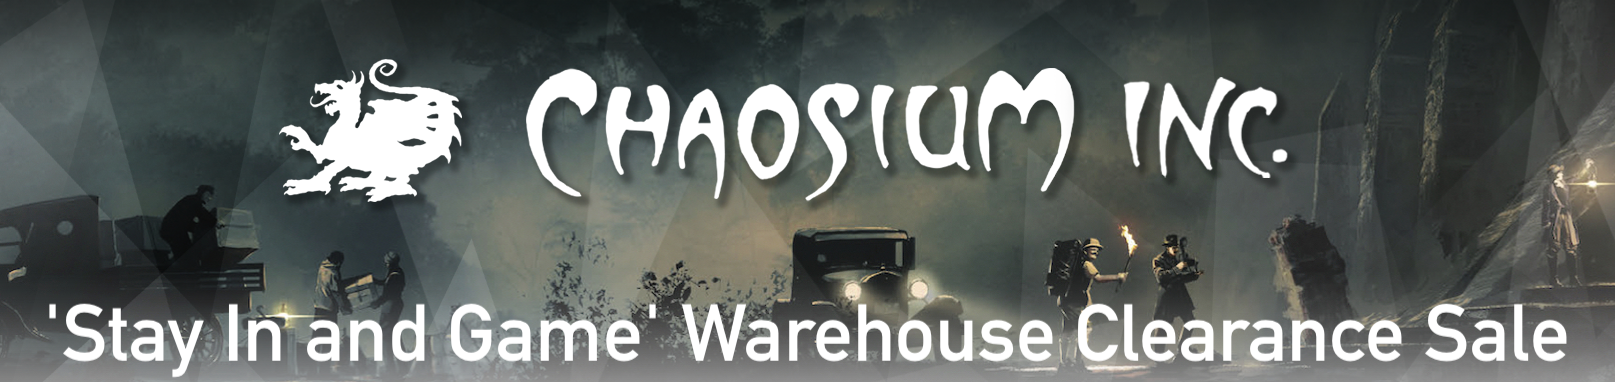 stay-in-and-game-warehouse-clearance-sale.png